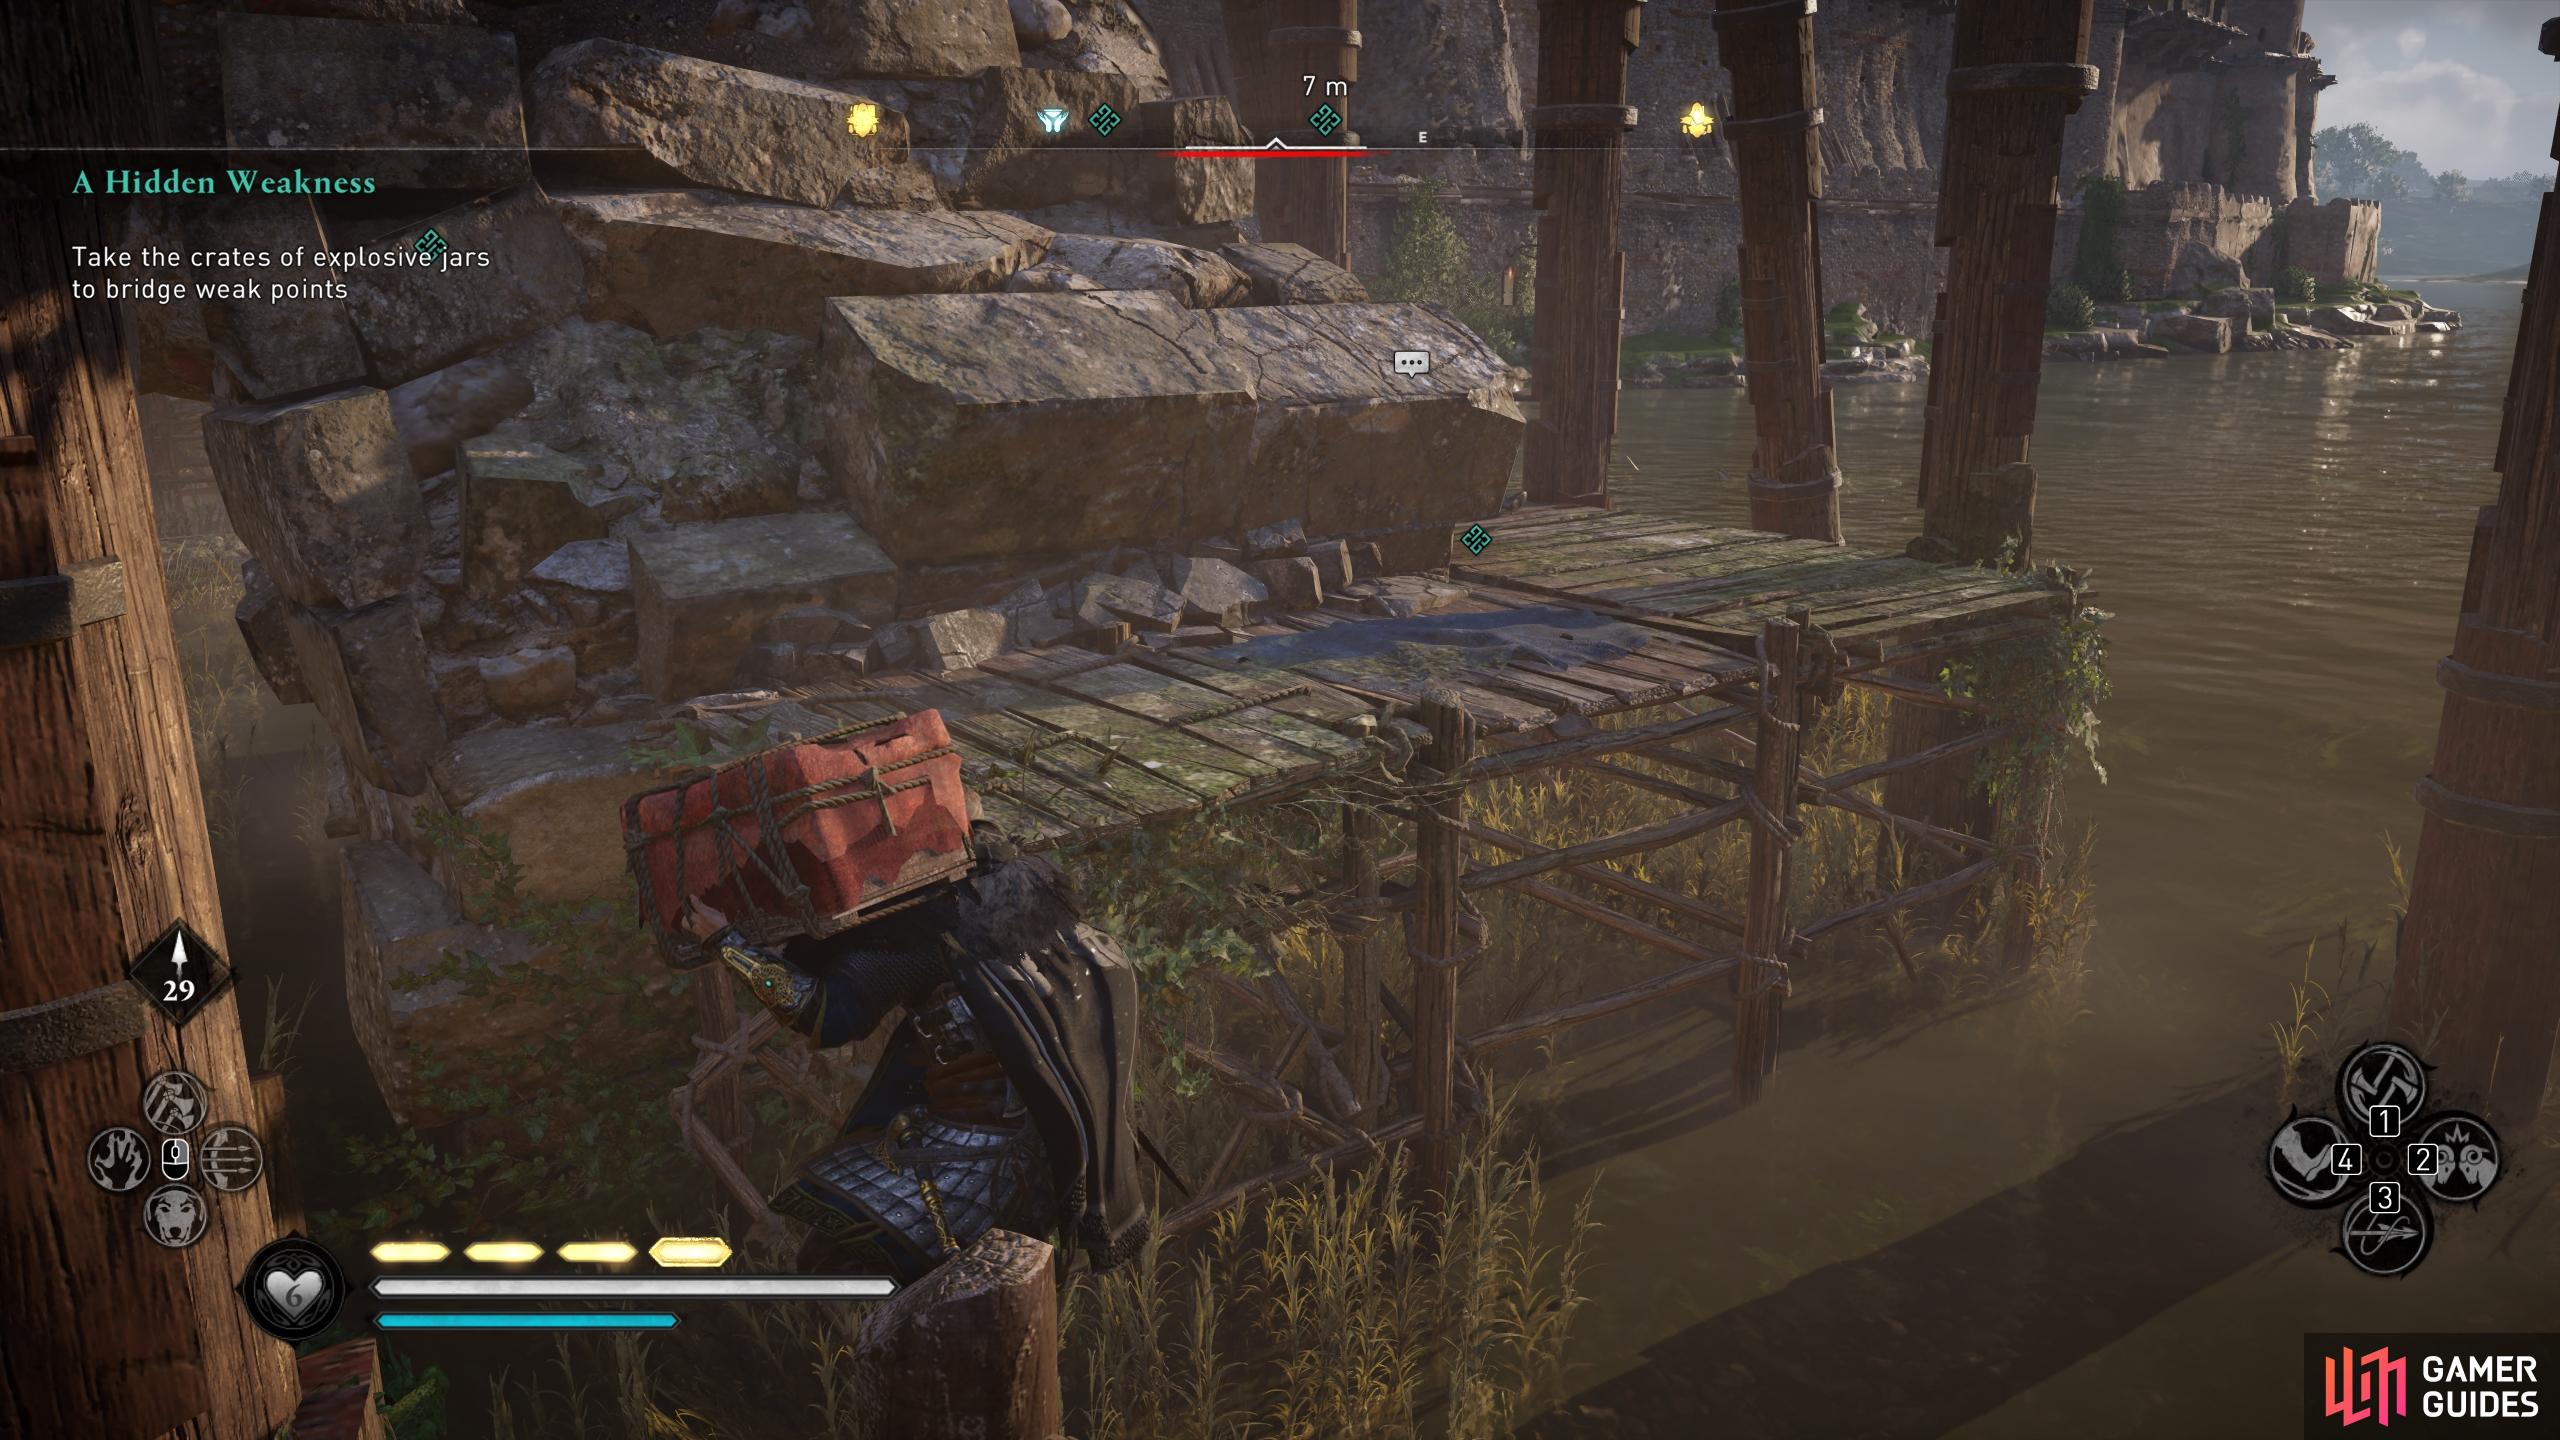 You'll be able to jump to the second marker from the wooden planks on the left side of the bridge.